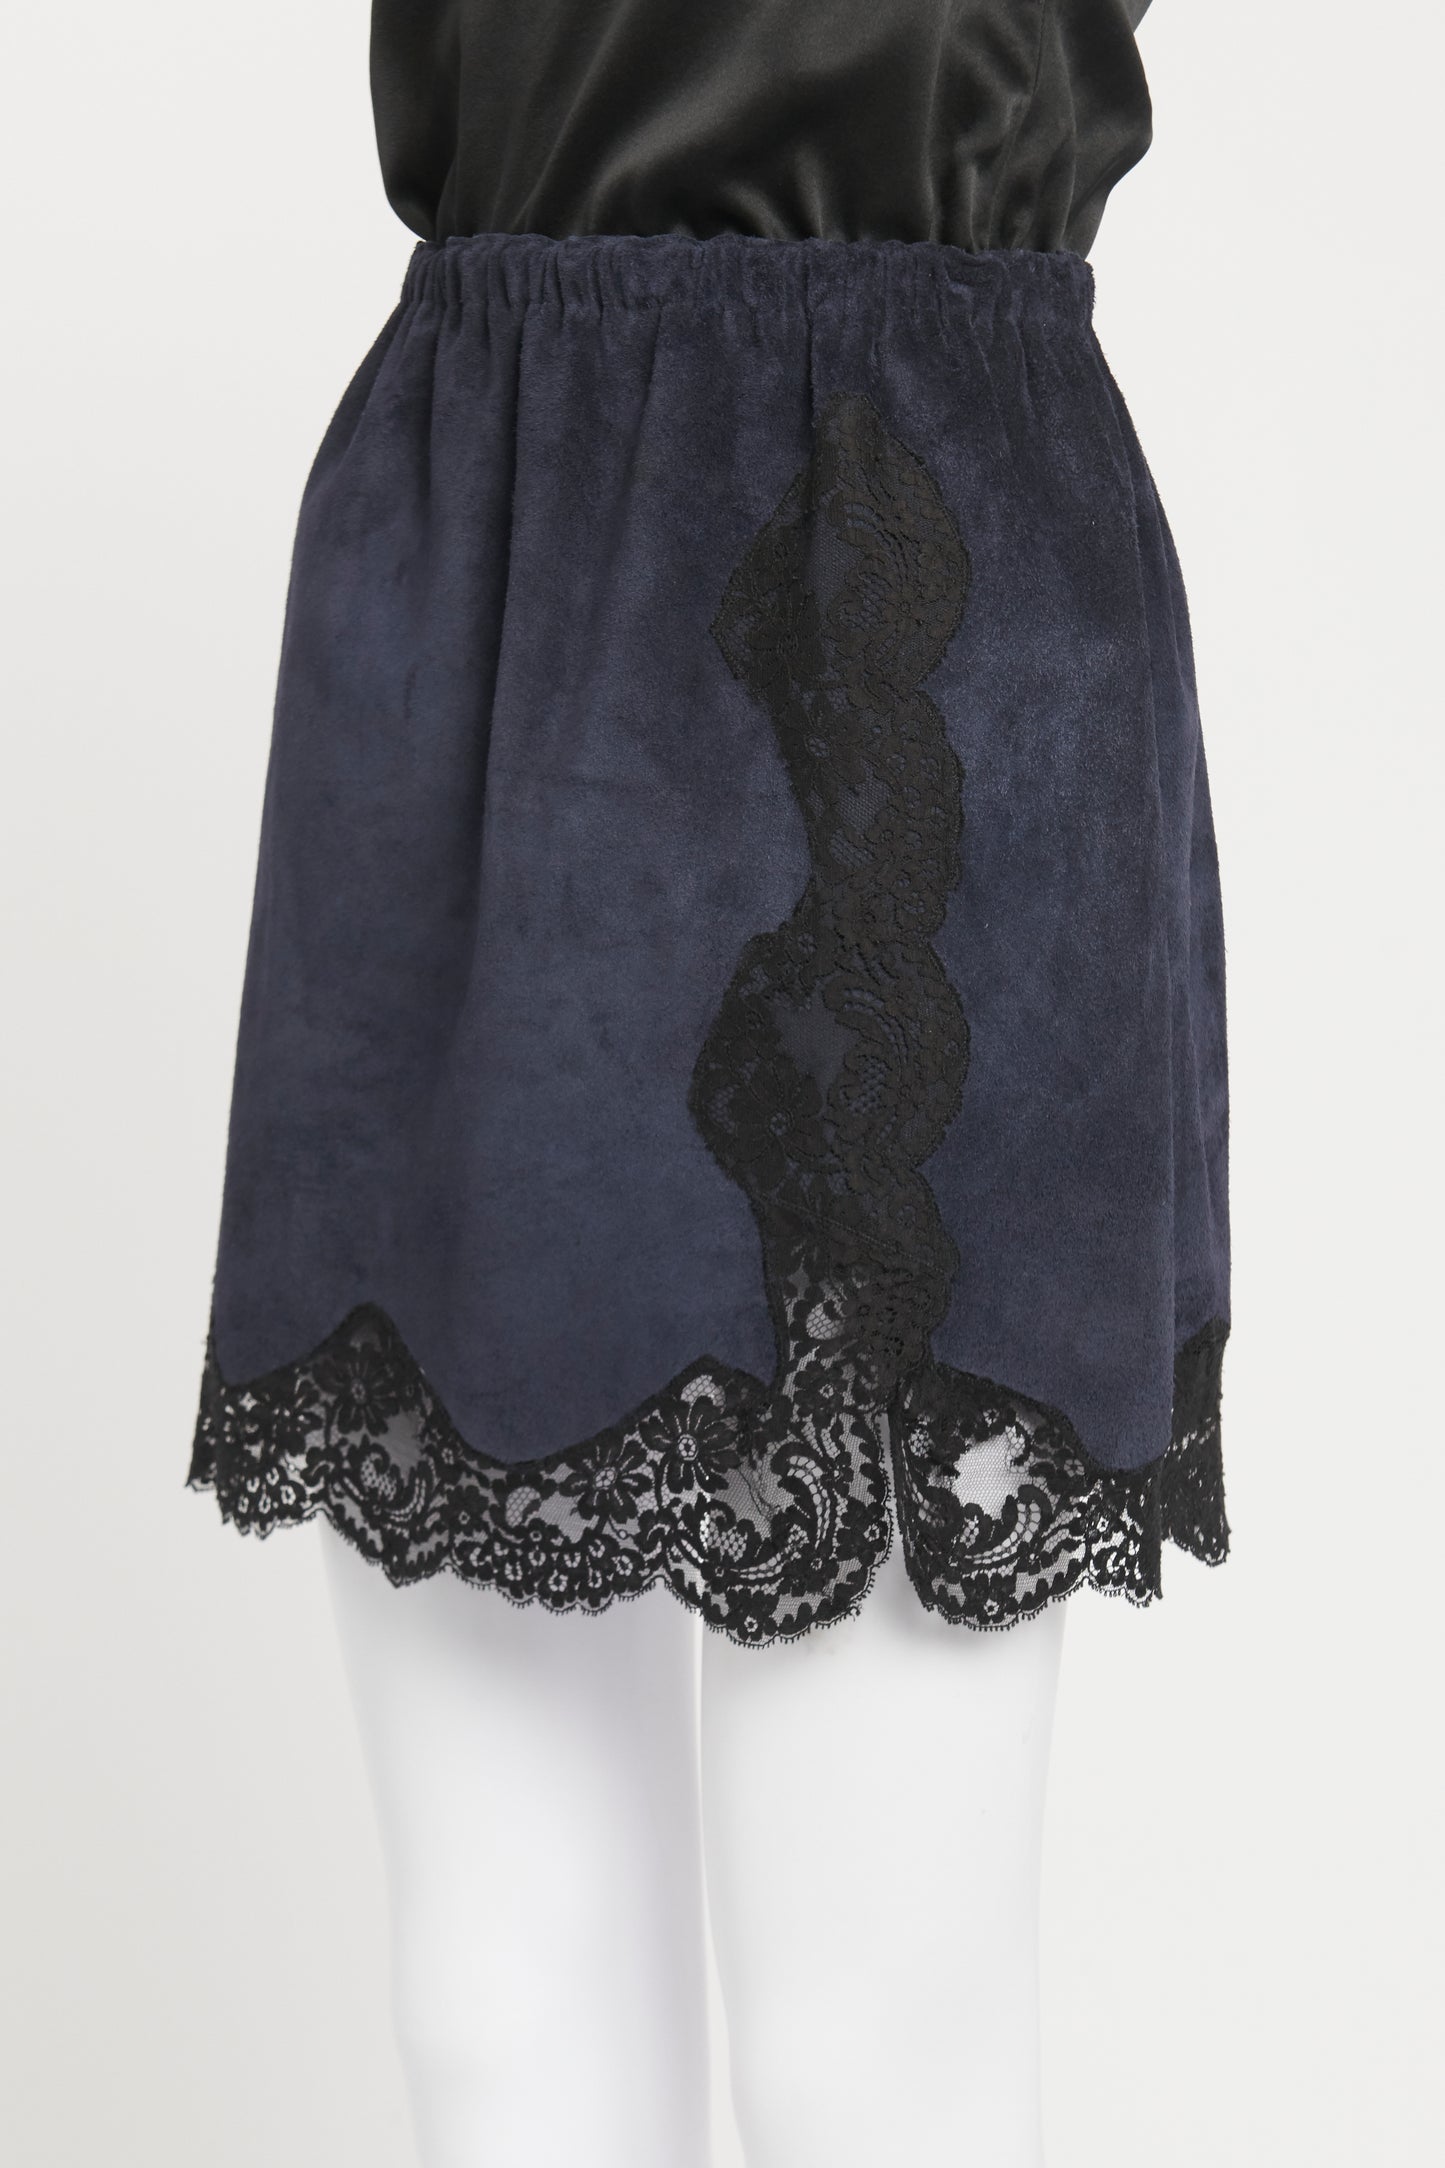 2015 Blue Suede Preowned Lace Trim Mini Skirt